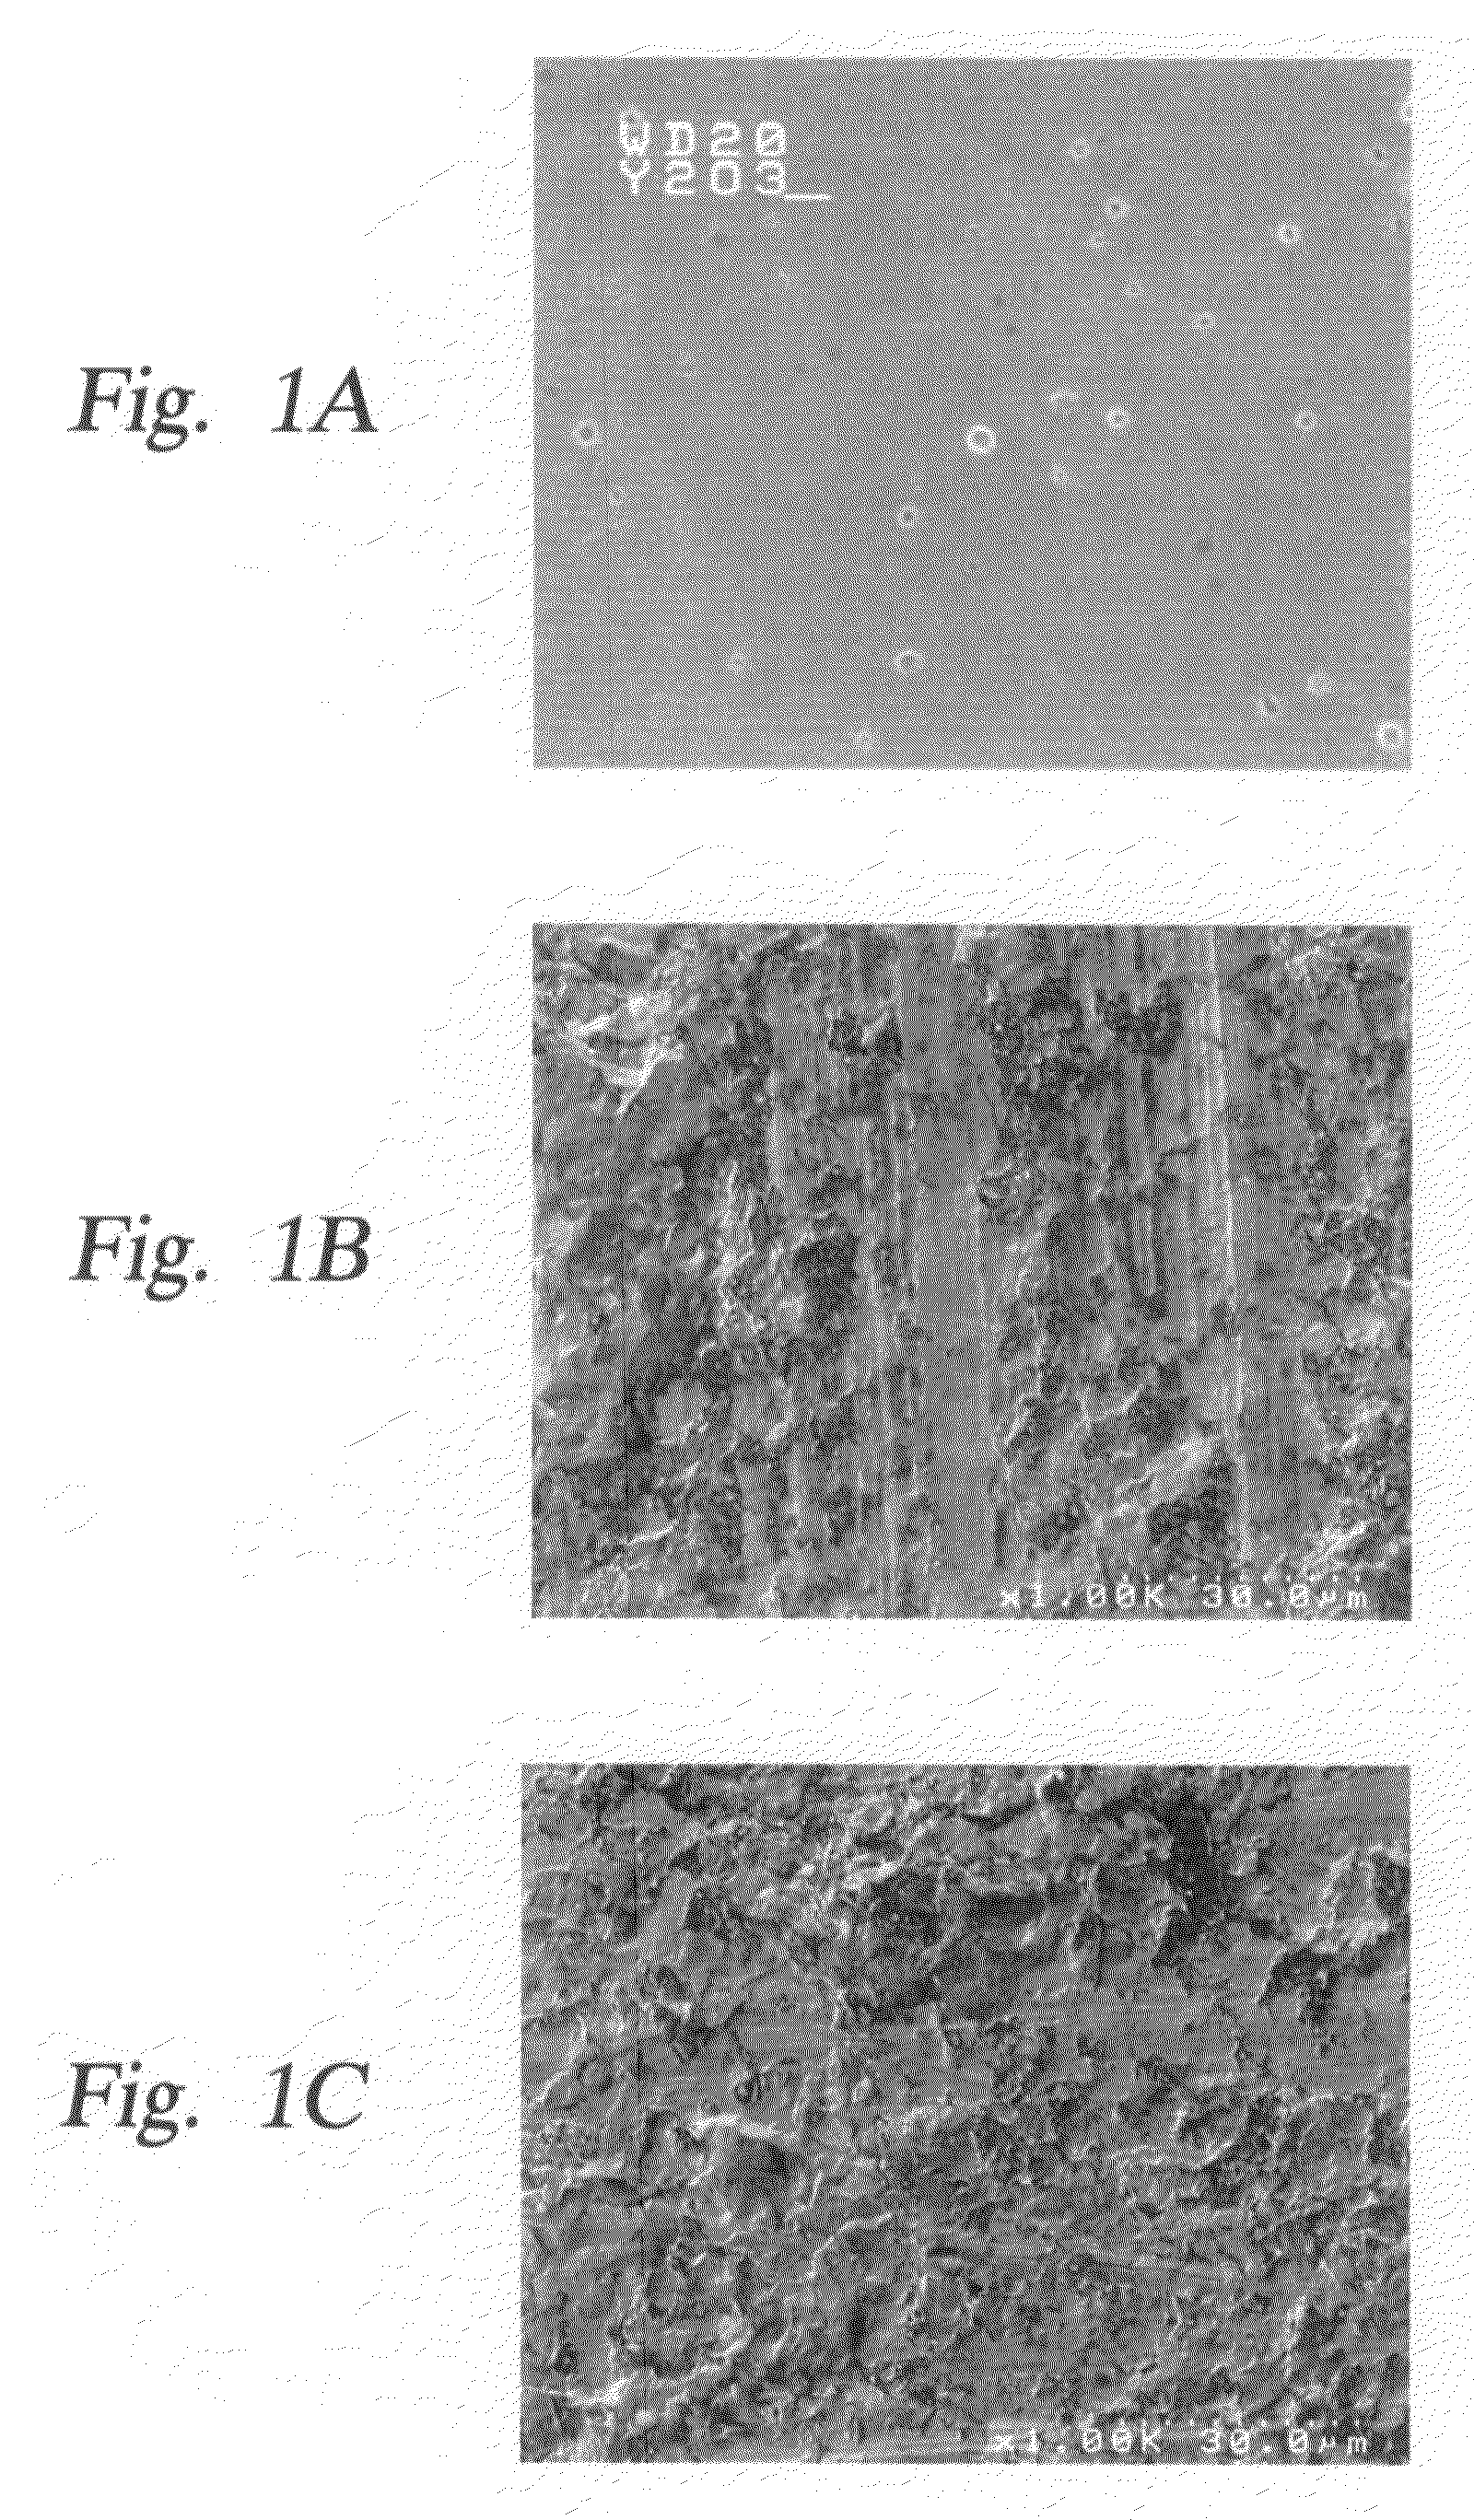 Method of reducing the erosion rate of semiconductor processing apparatus exposed to halogen-containing plasmas